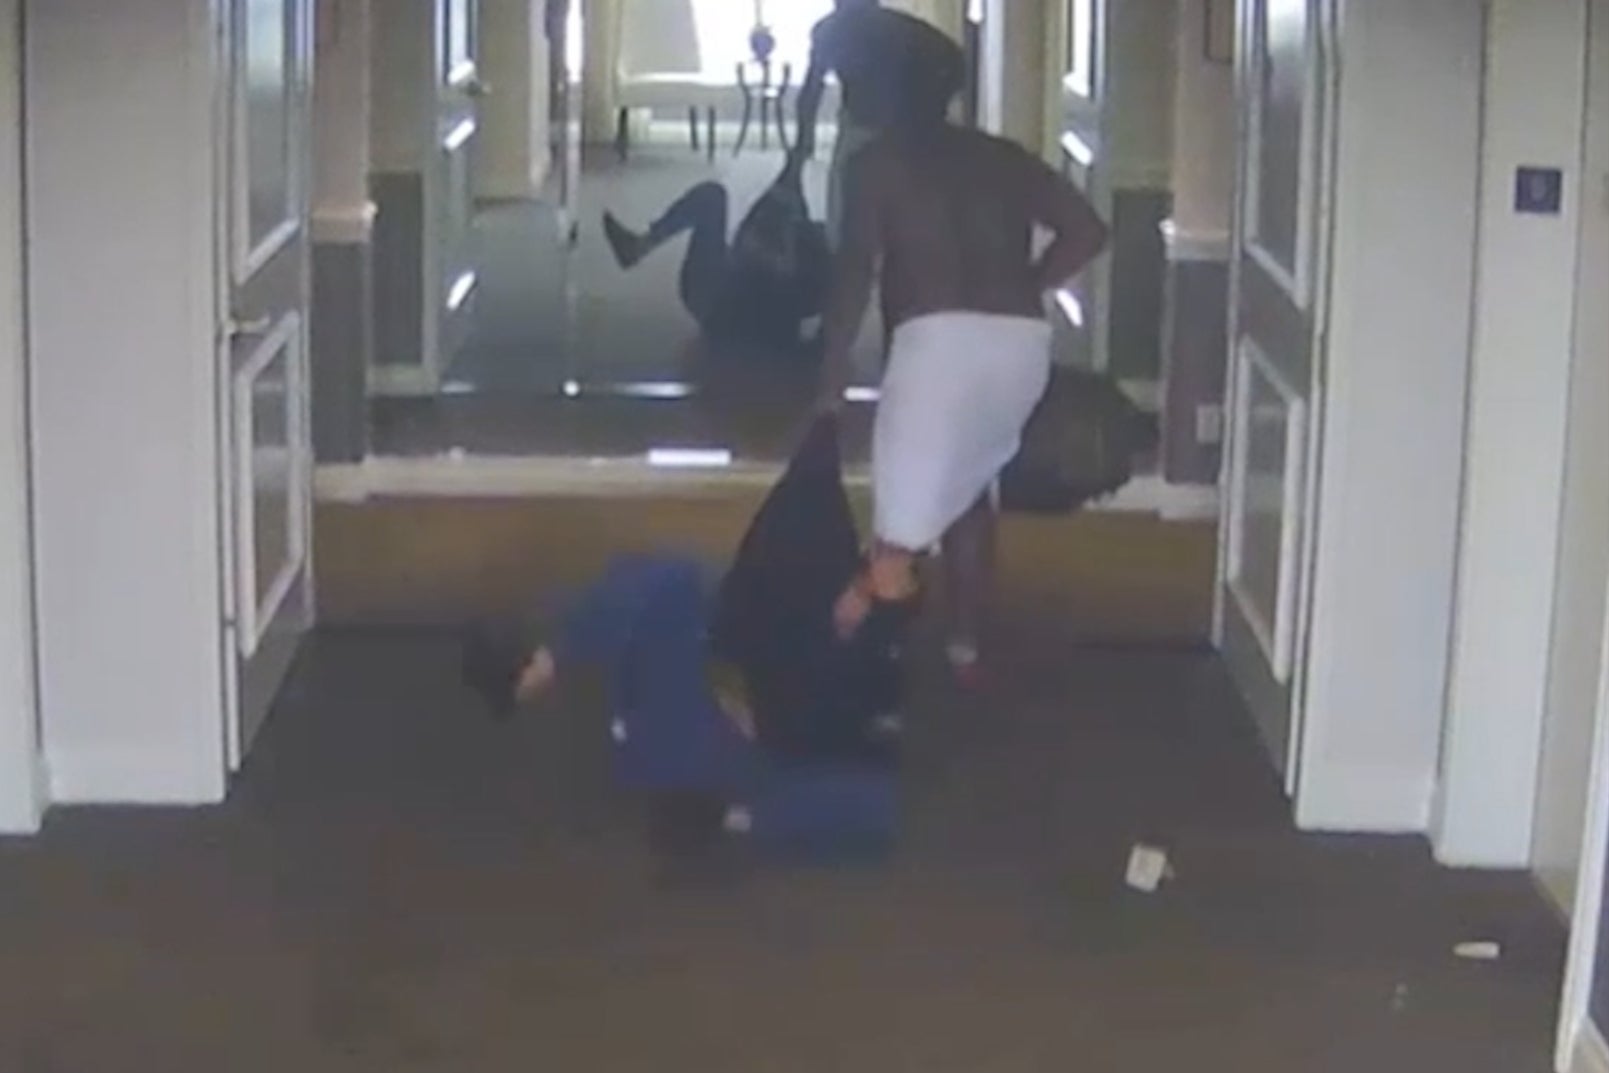 In the video, Combs is then seen attempting to drag Ms Ventura back down the hotel corridor after punching and kicking her several times